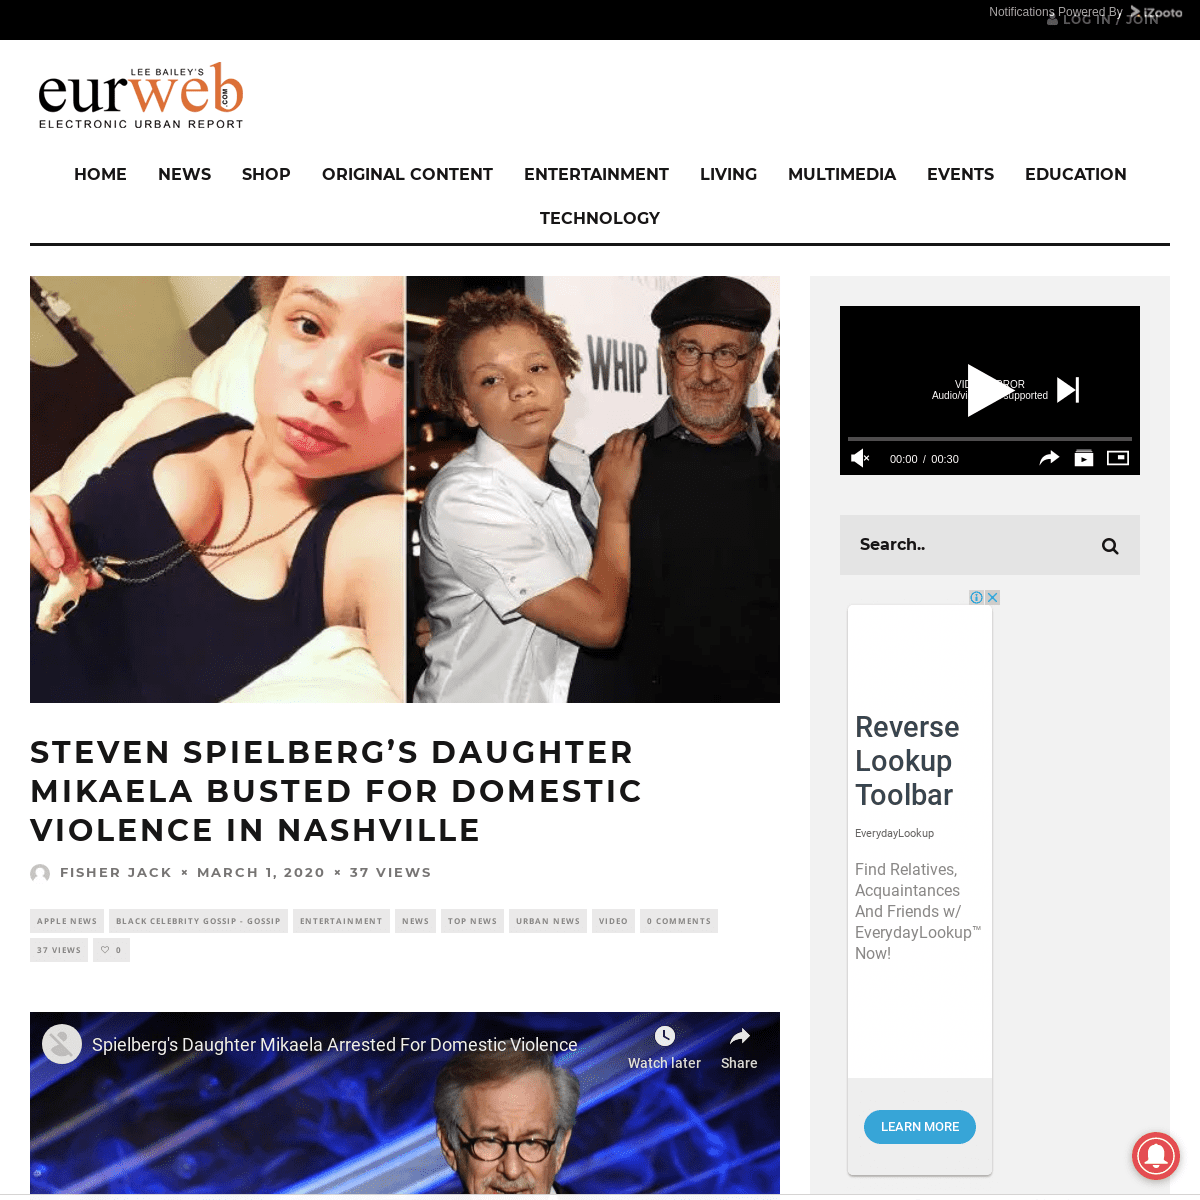 A complete backup of eurweb.com/2020/03/01/steven-spielbergs-daughter-mikaela-busted-for-domestic-violence-in-nashville/